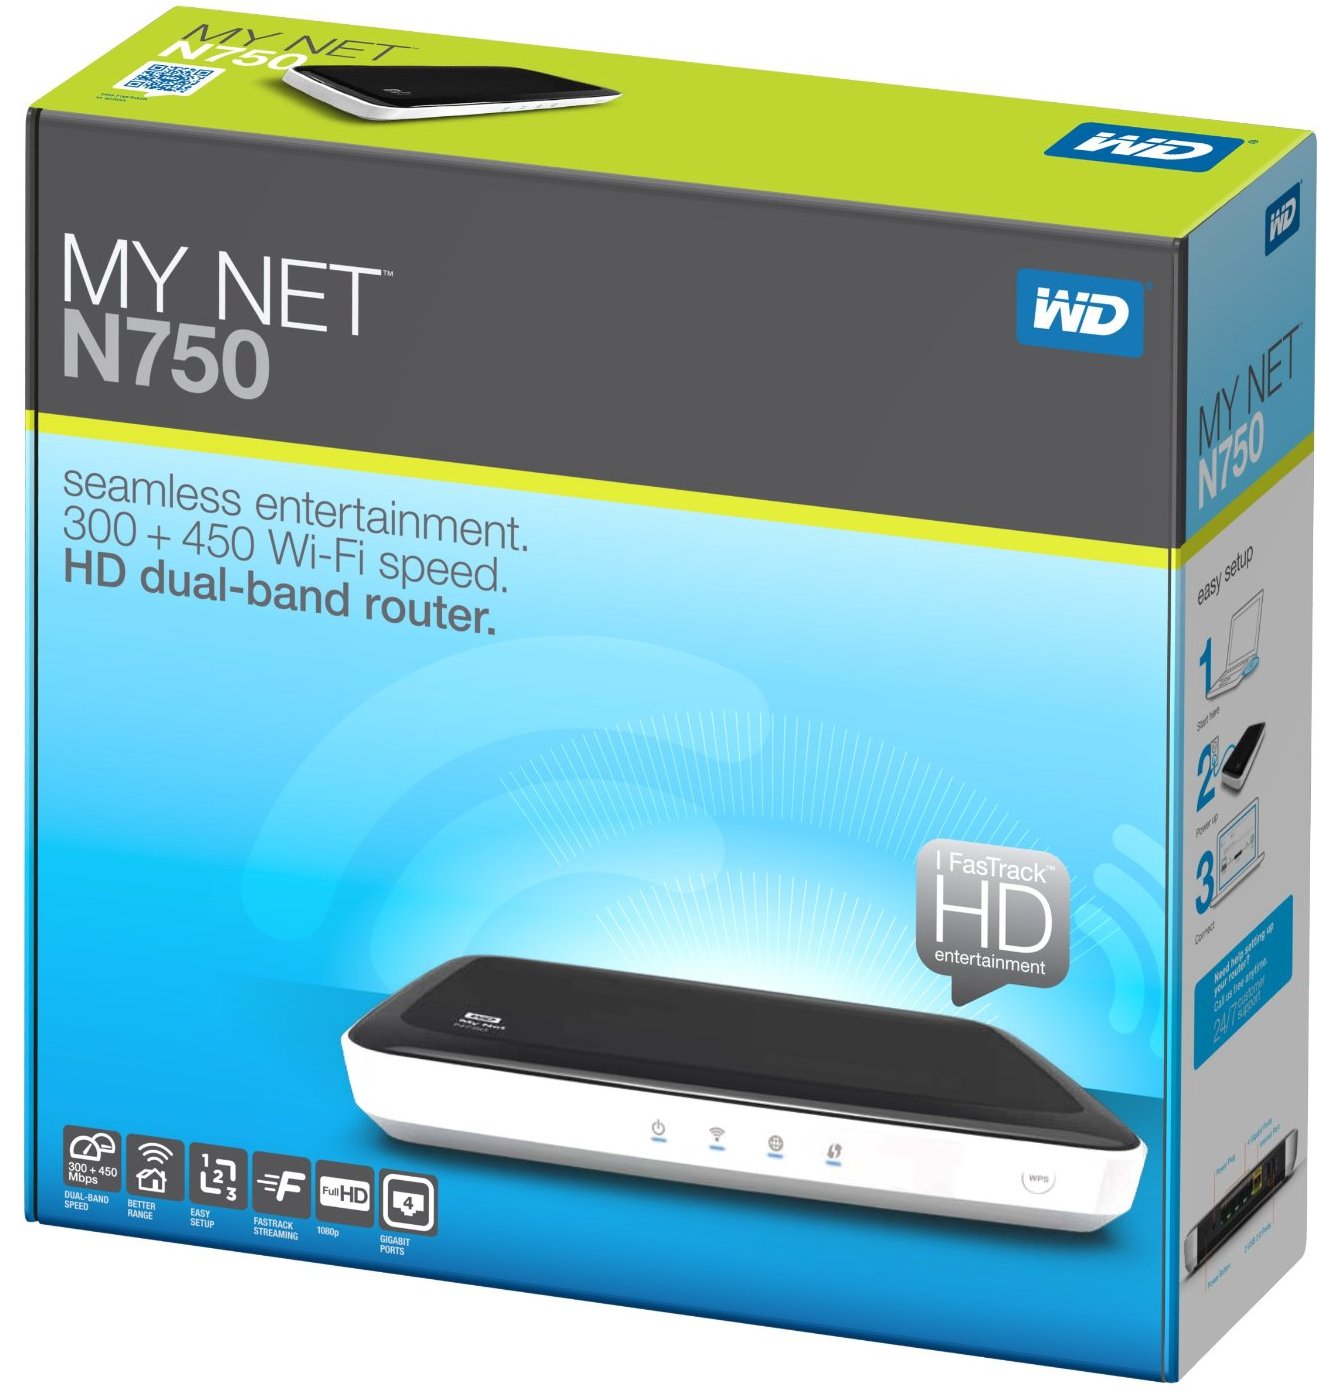 WD-My-Net-N750-HD-Dual-Band-Router-Wireless-N-WiFi-Router-Accelerate-HD-Review1